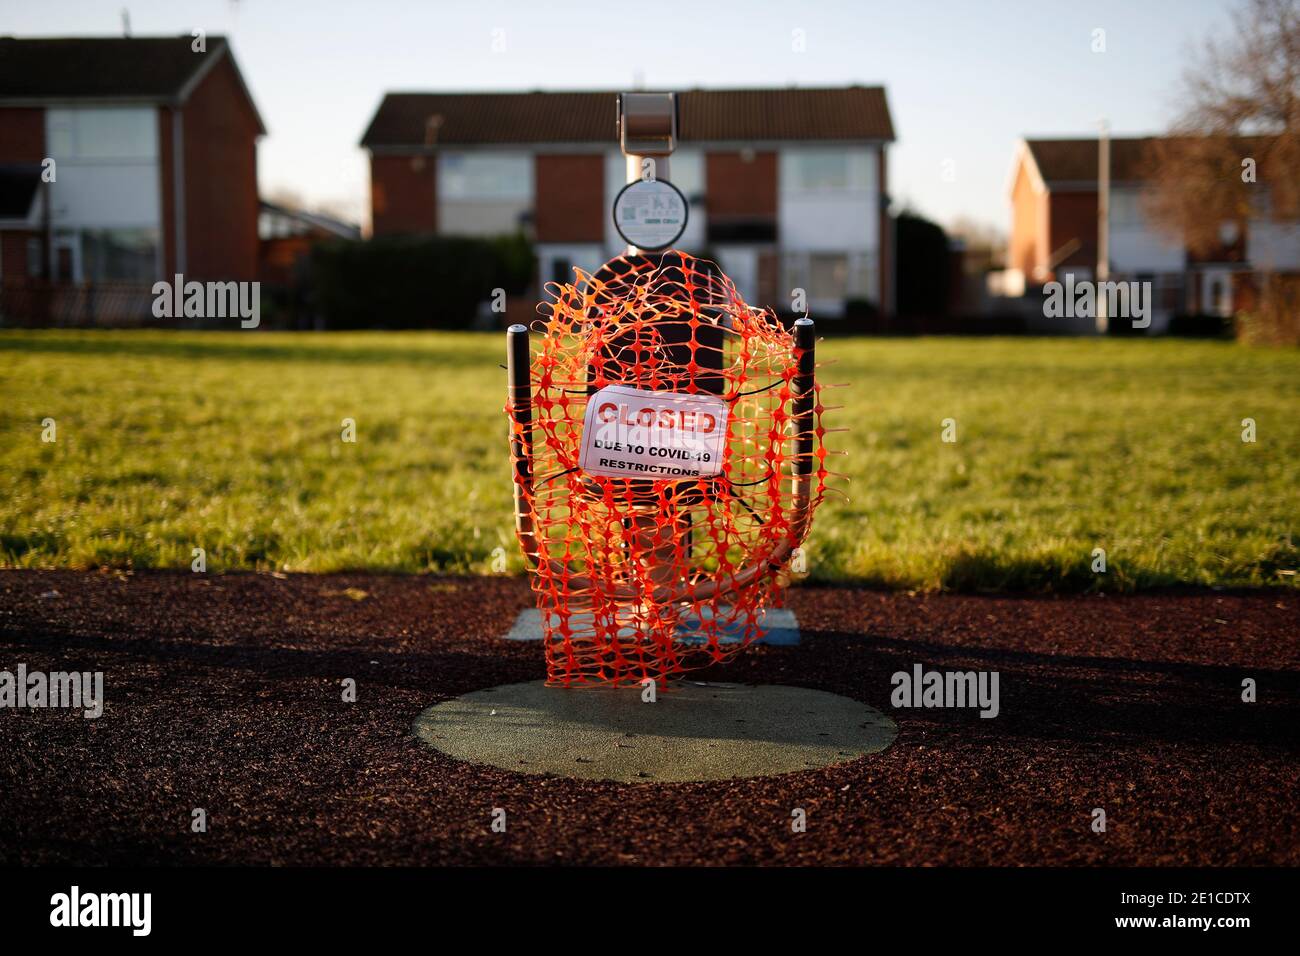 Loughborough, Leicestershire, UK. 6th January 2021. Outdoor exercise equipment is closed off during the third national Covid-19 lockdown. Credit Darren Staples/Alamy Live News. Stock Photo